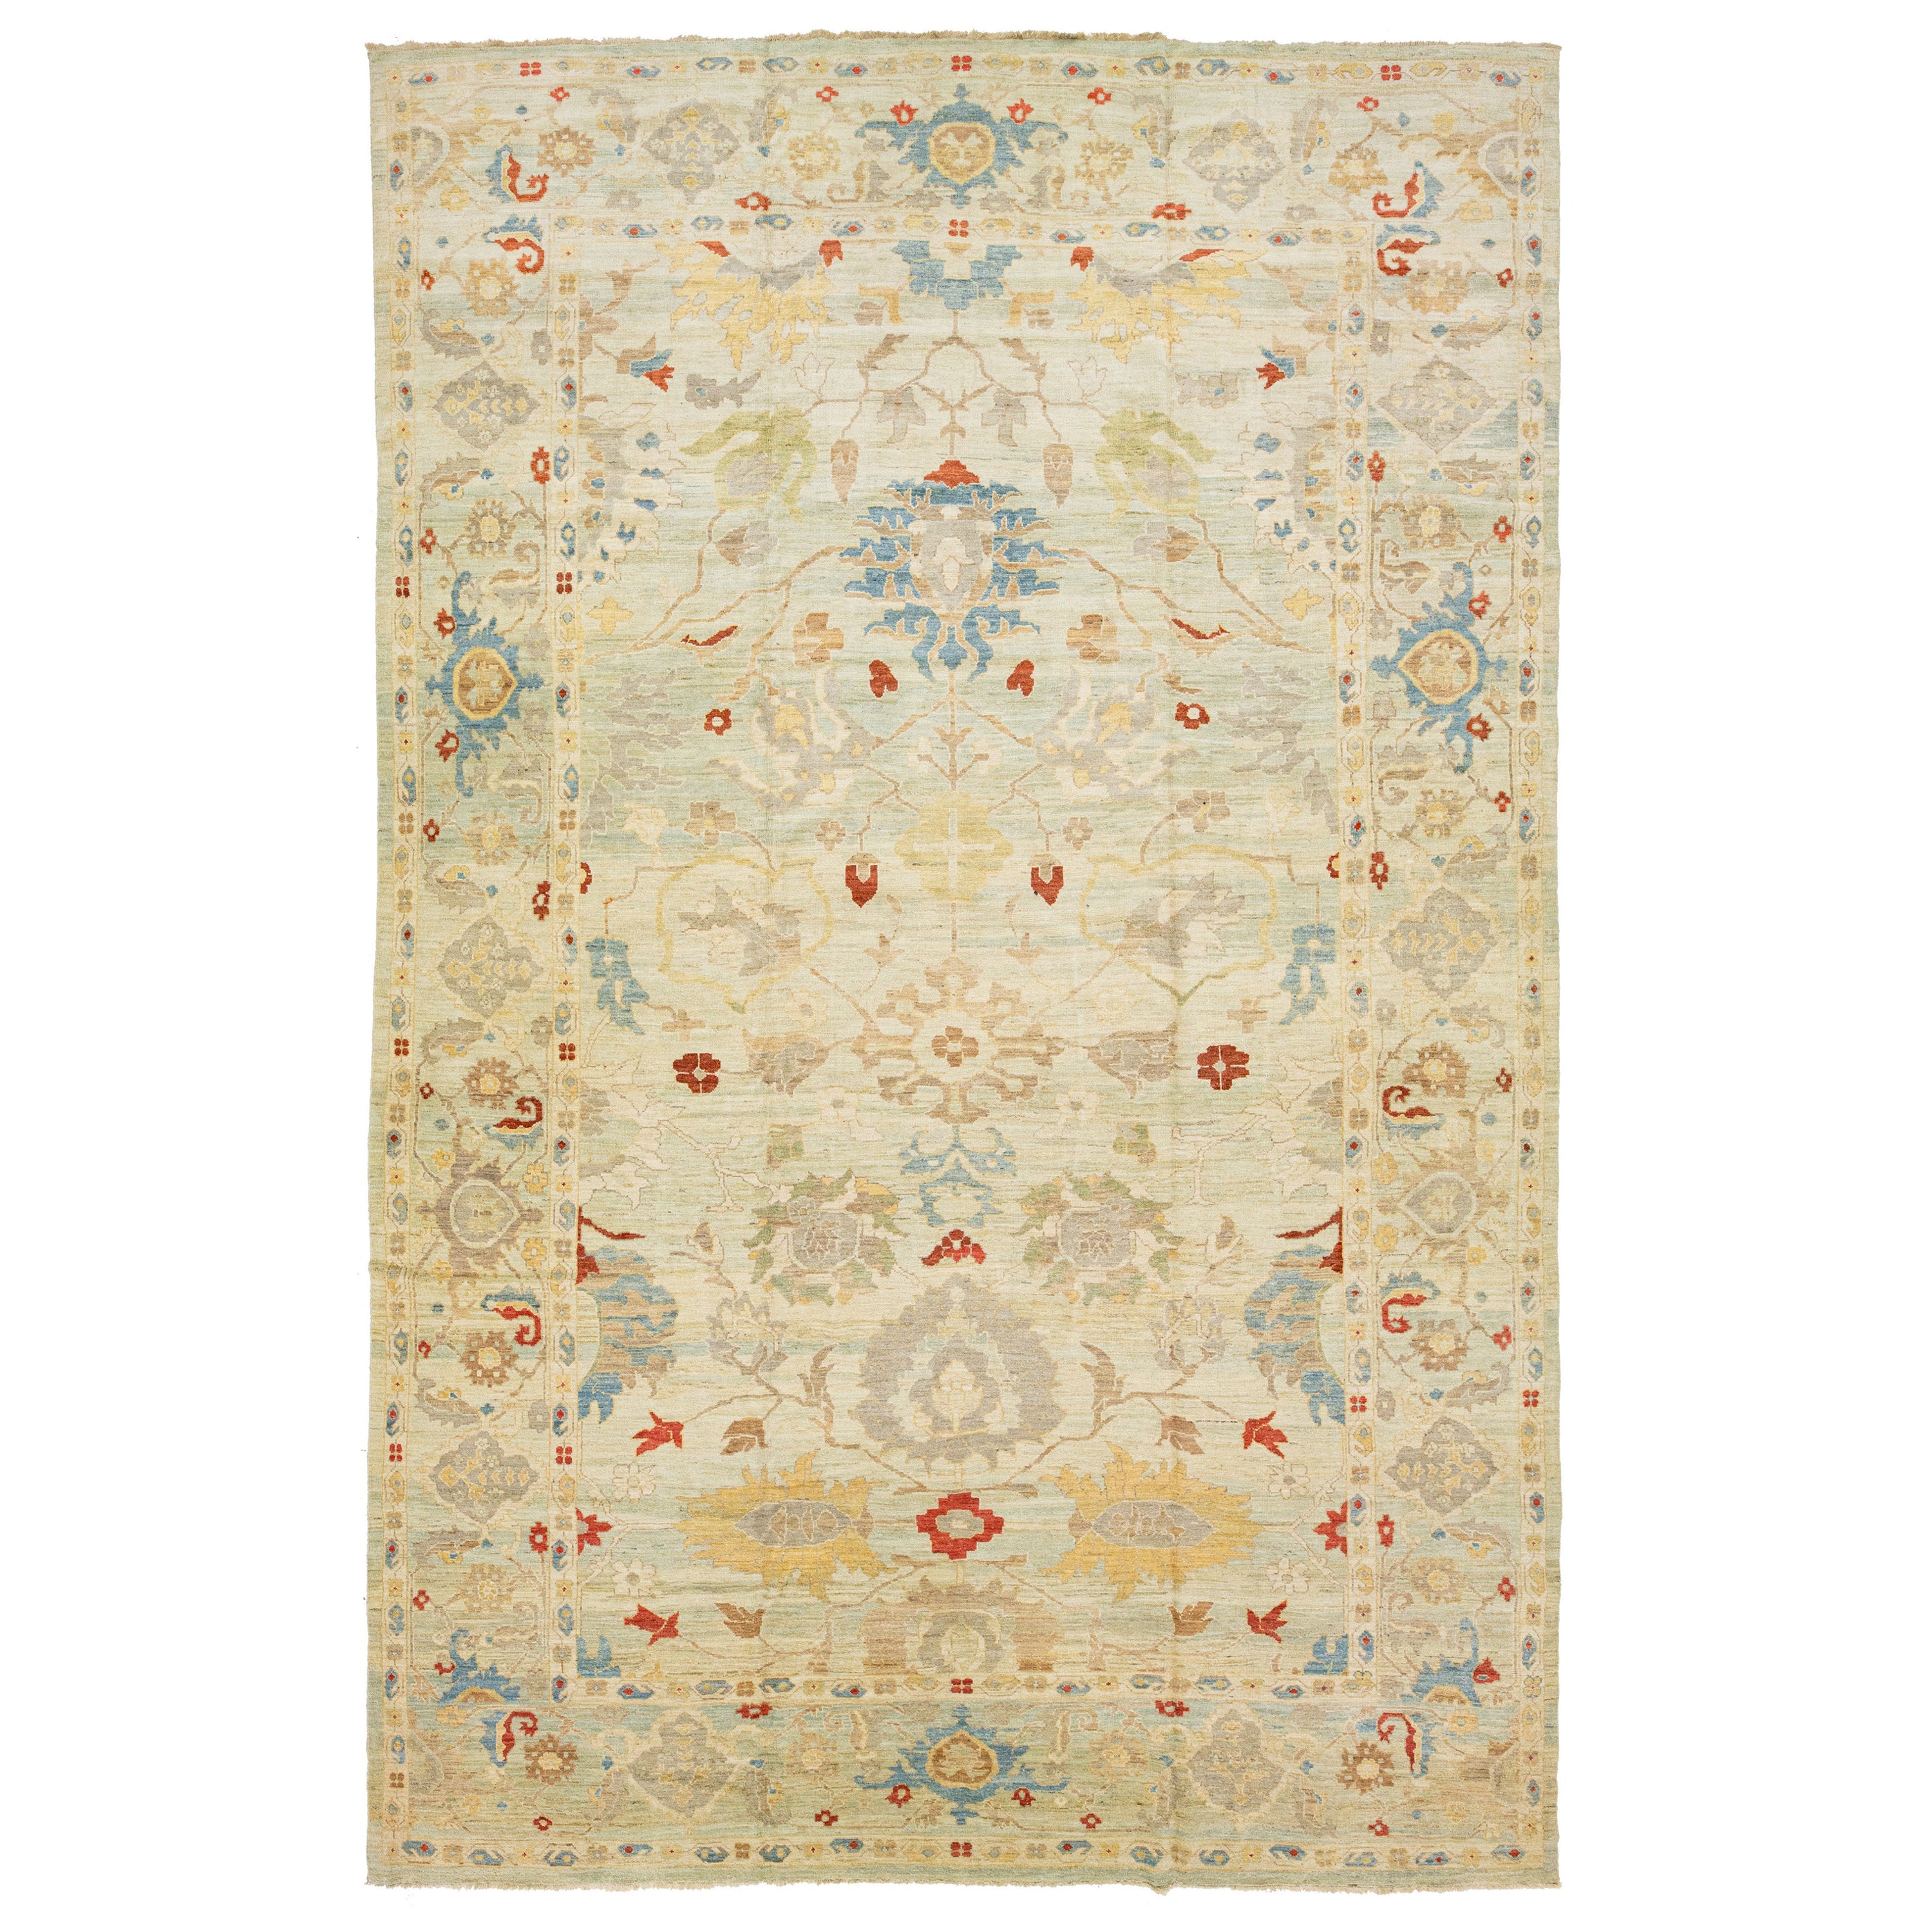 Modern Oversize Sultanabad Wool Rug Handmade Light Blue And Beige Field For Sale